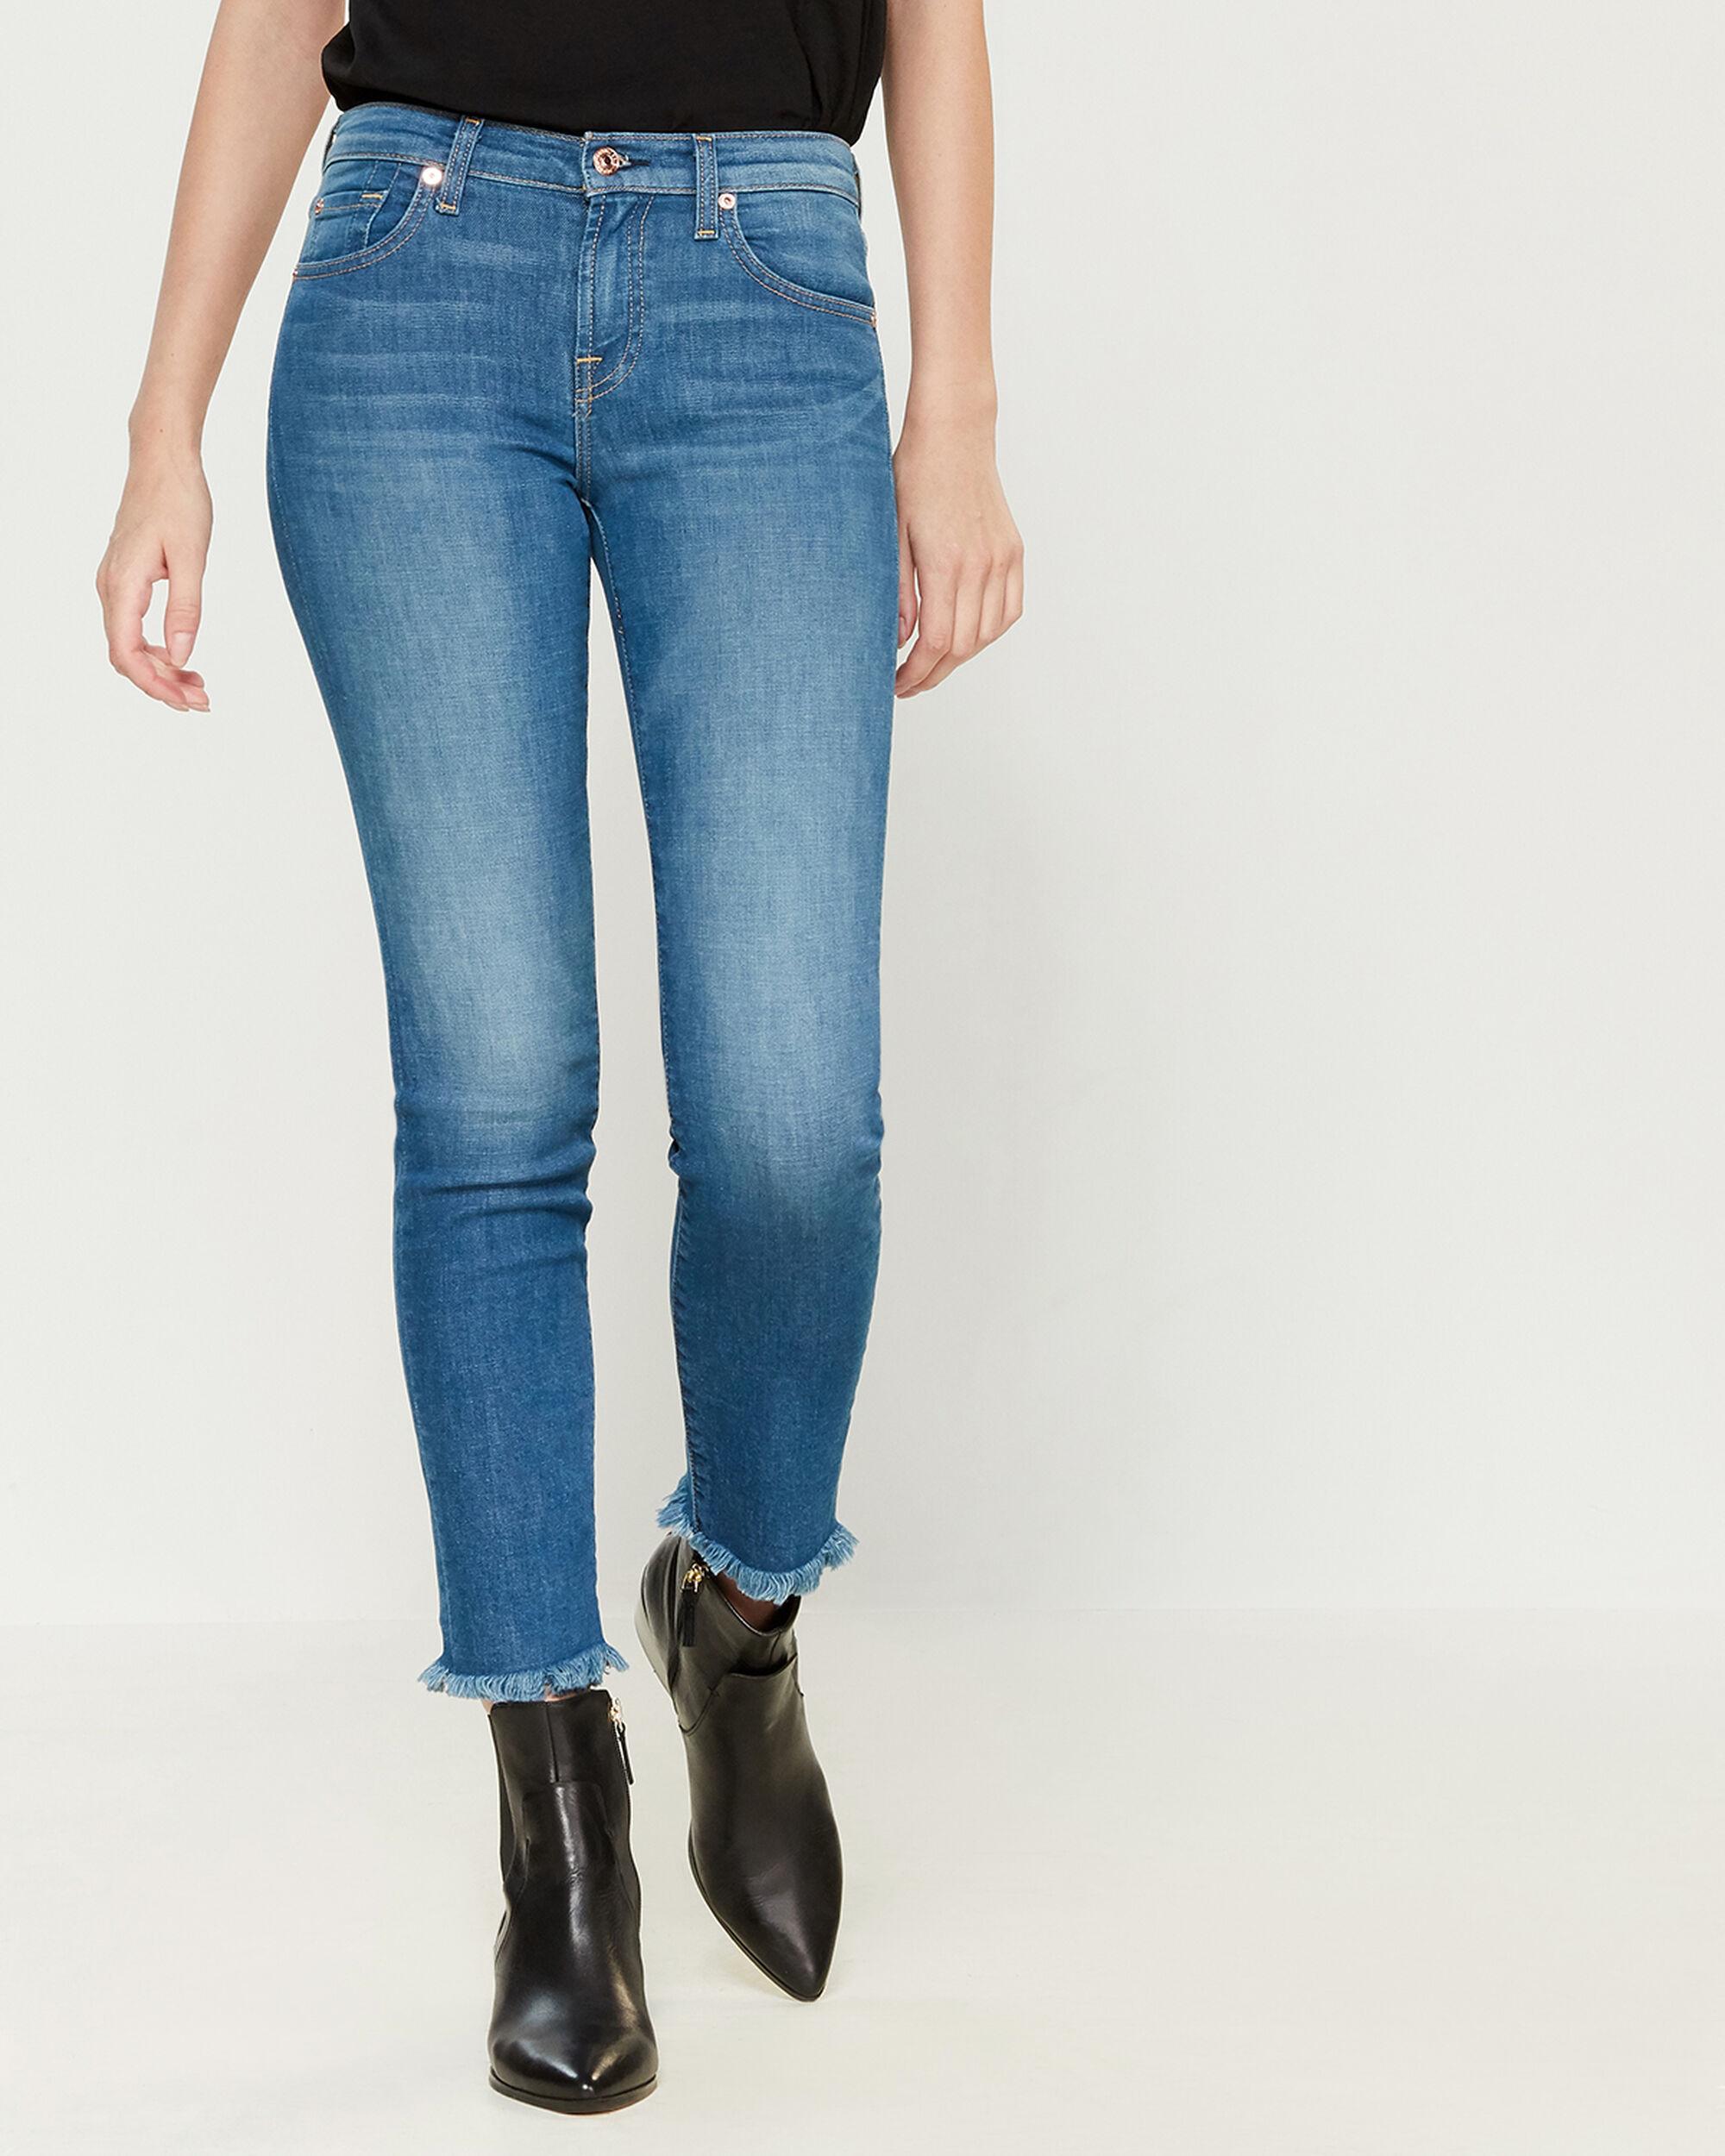 7 For All Mankind Denim Roxanne Frayed Ankle Jeans in Blue - Lyst